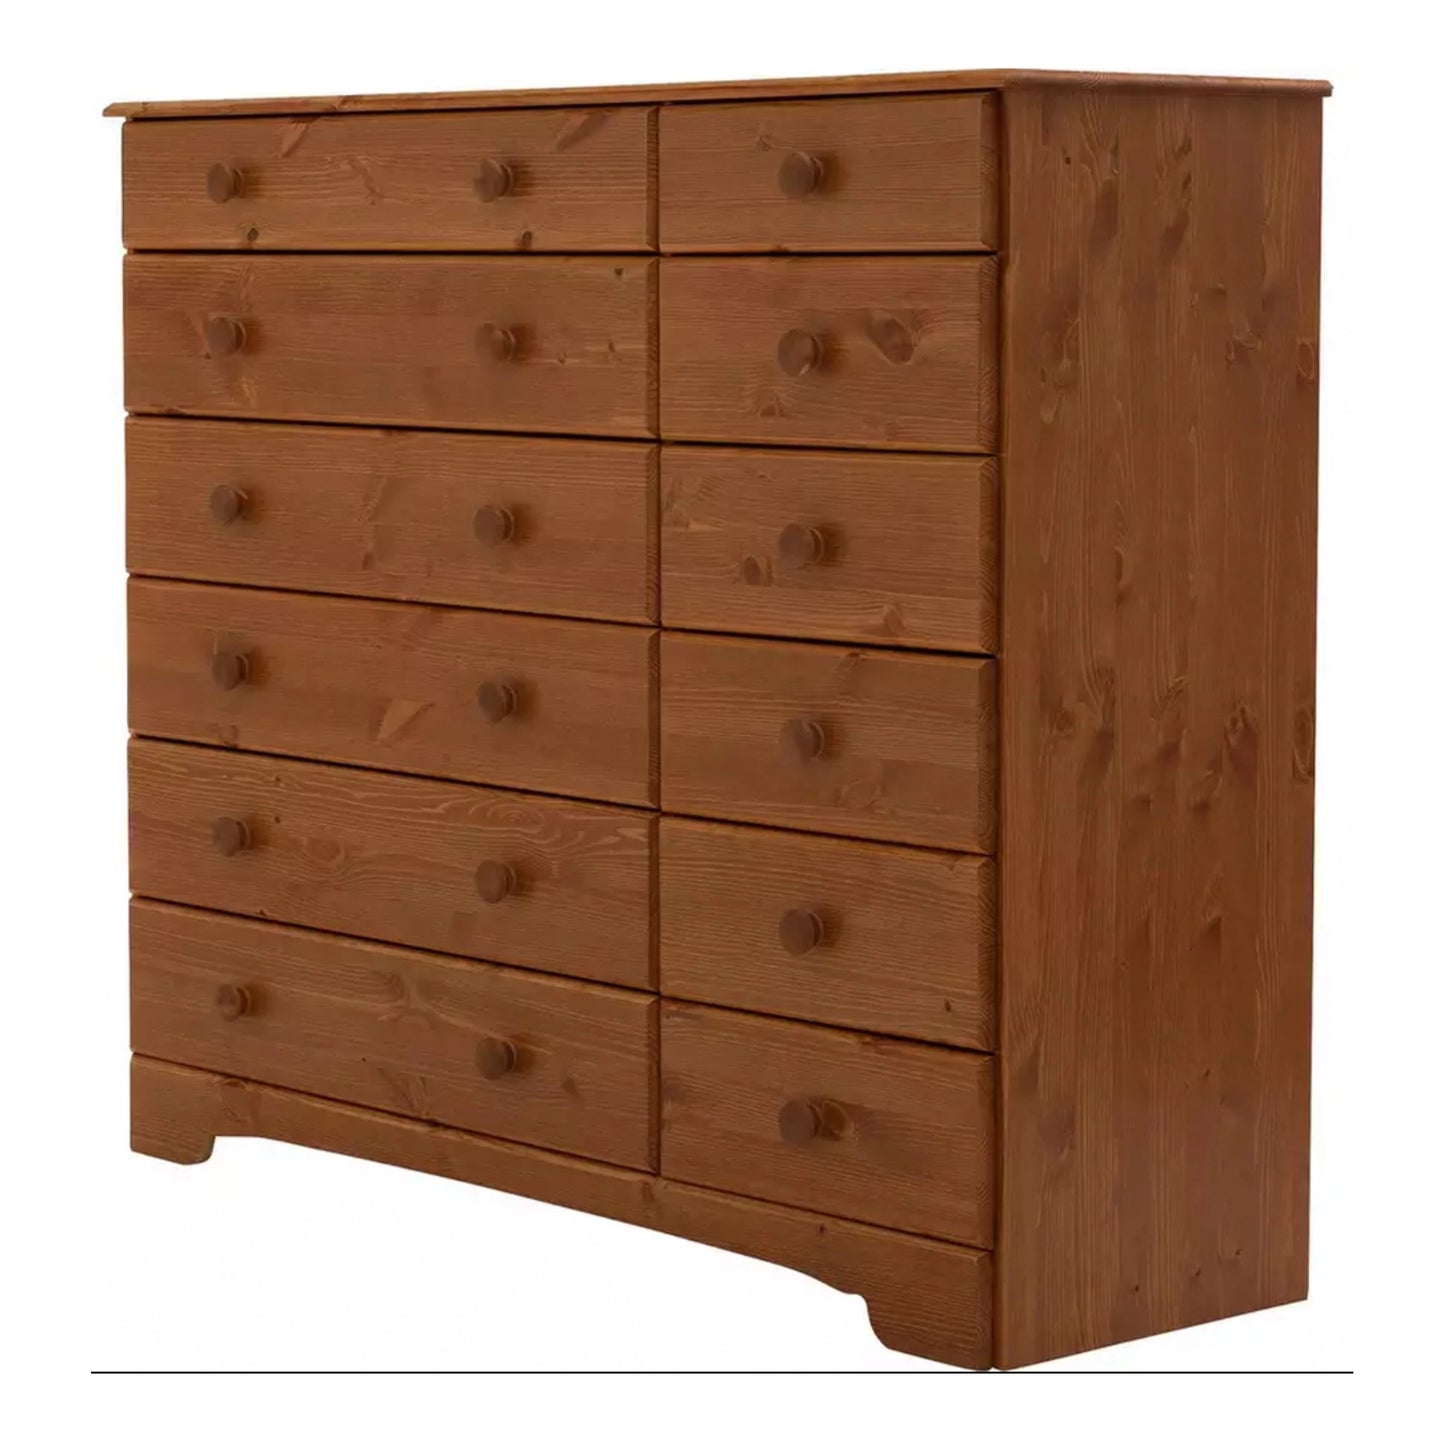 Furniture To Go Nordic Chest of Drawers 6+6 Drawers, Cherry